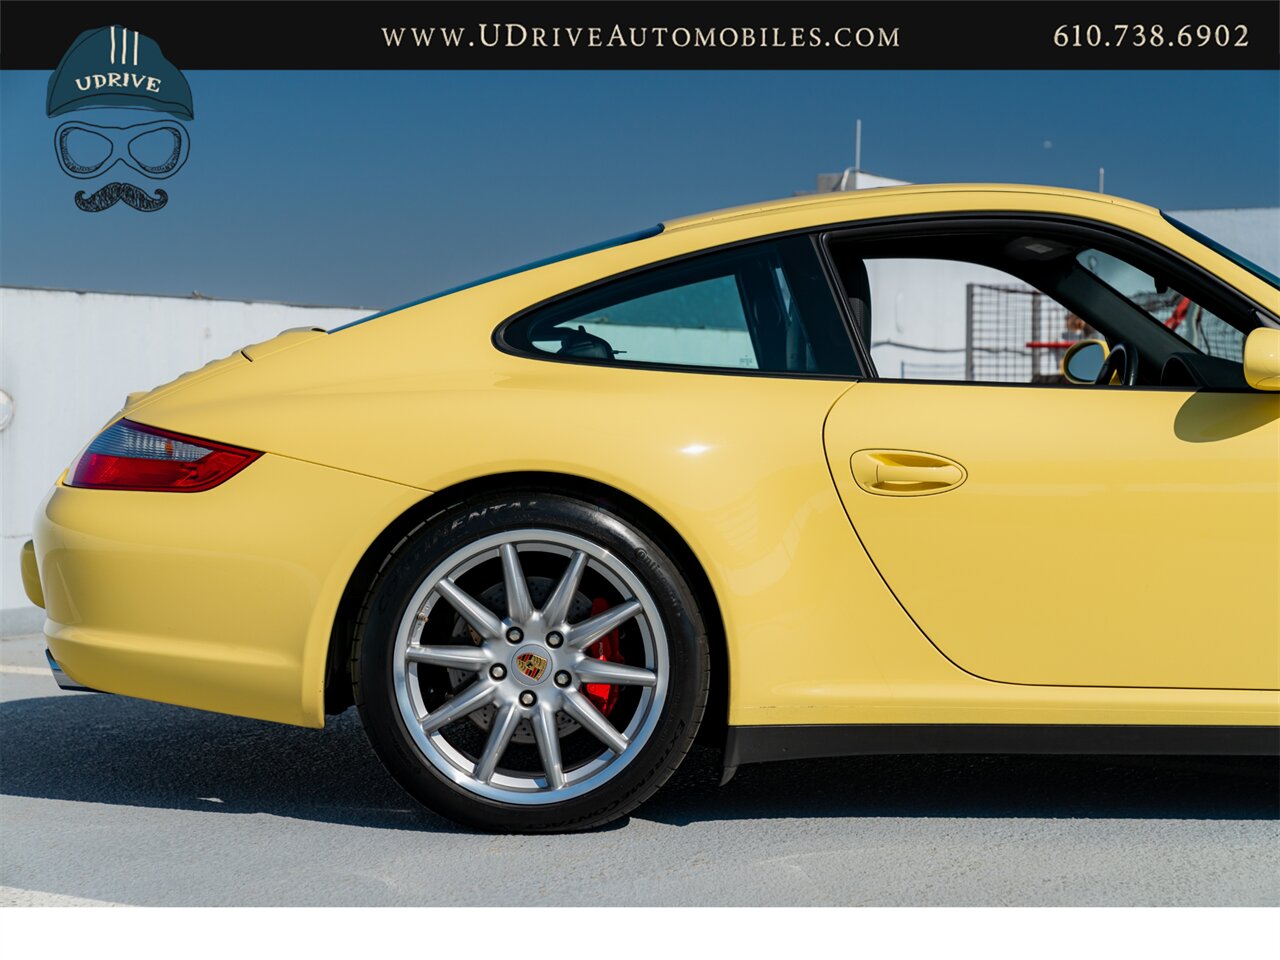 2007 Porsche 911 Carrera 4S 997 C4S Paint To Sample Pastel Yellow  6 Speed Sport Chrono Full Leather Yellow Gauges - Photo 17 - West Chester, PA 19382